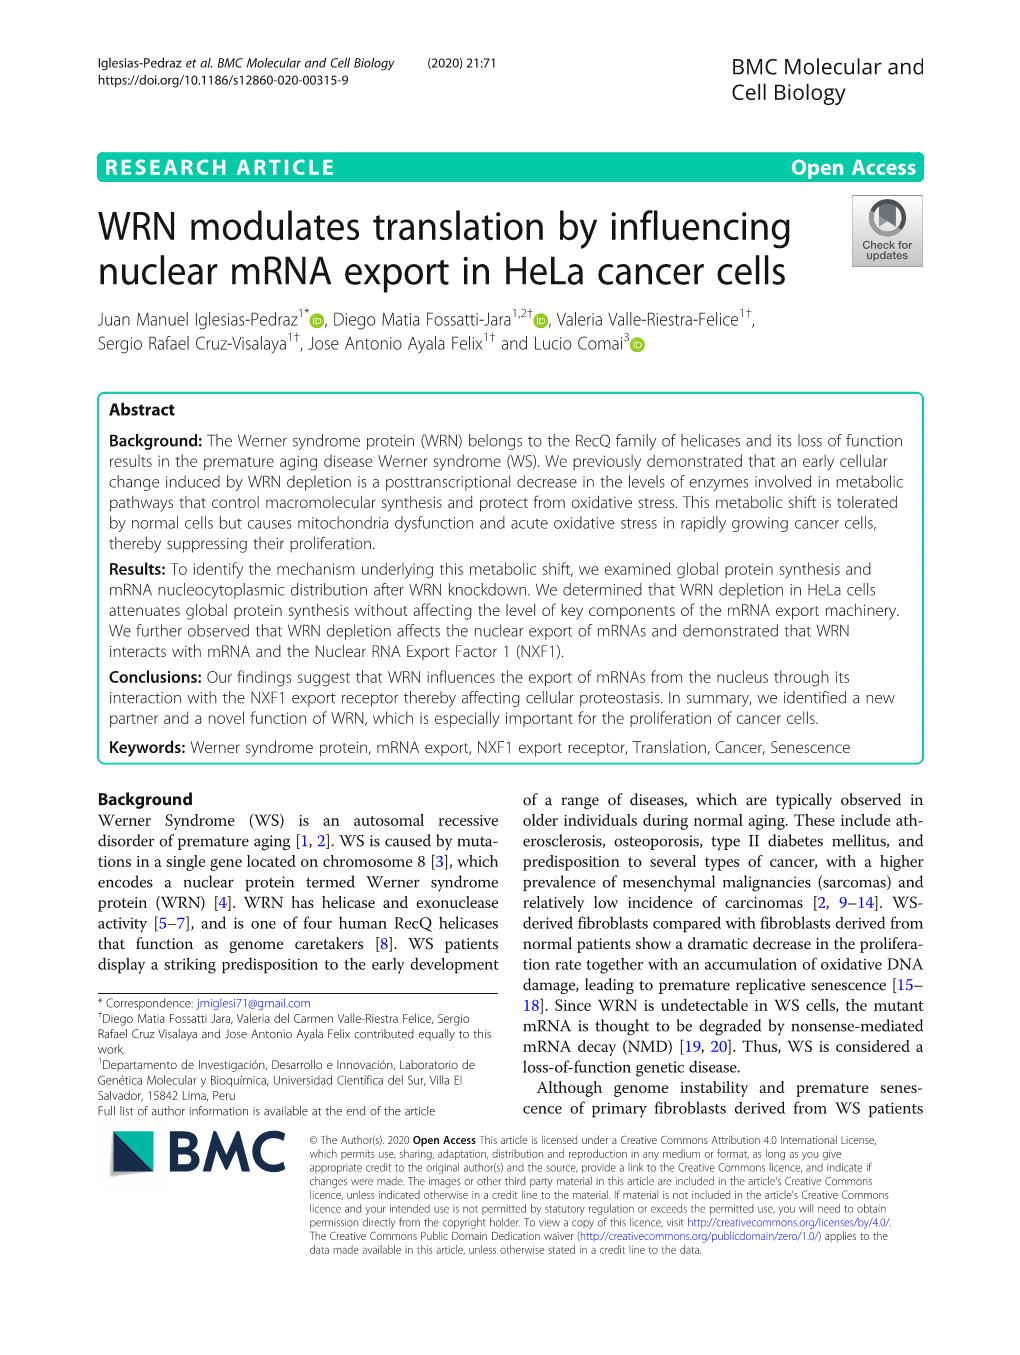 WRN Modulates Translation by Influencing Nuclear Mrna Export In